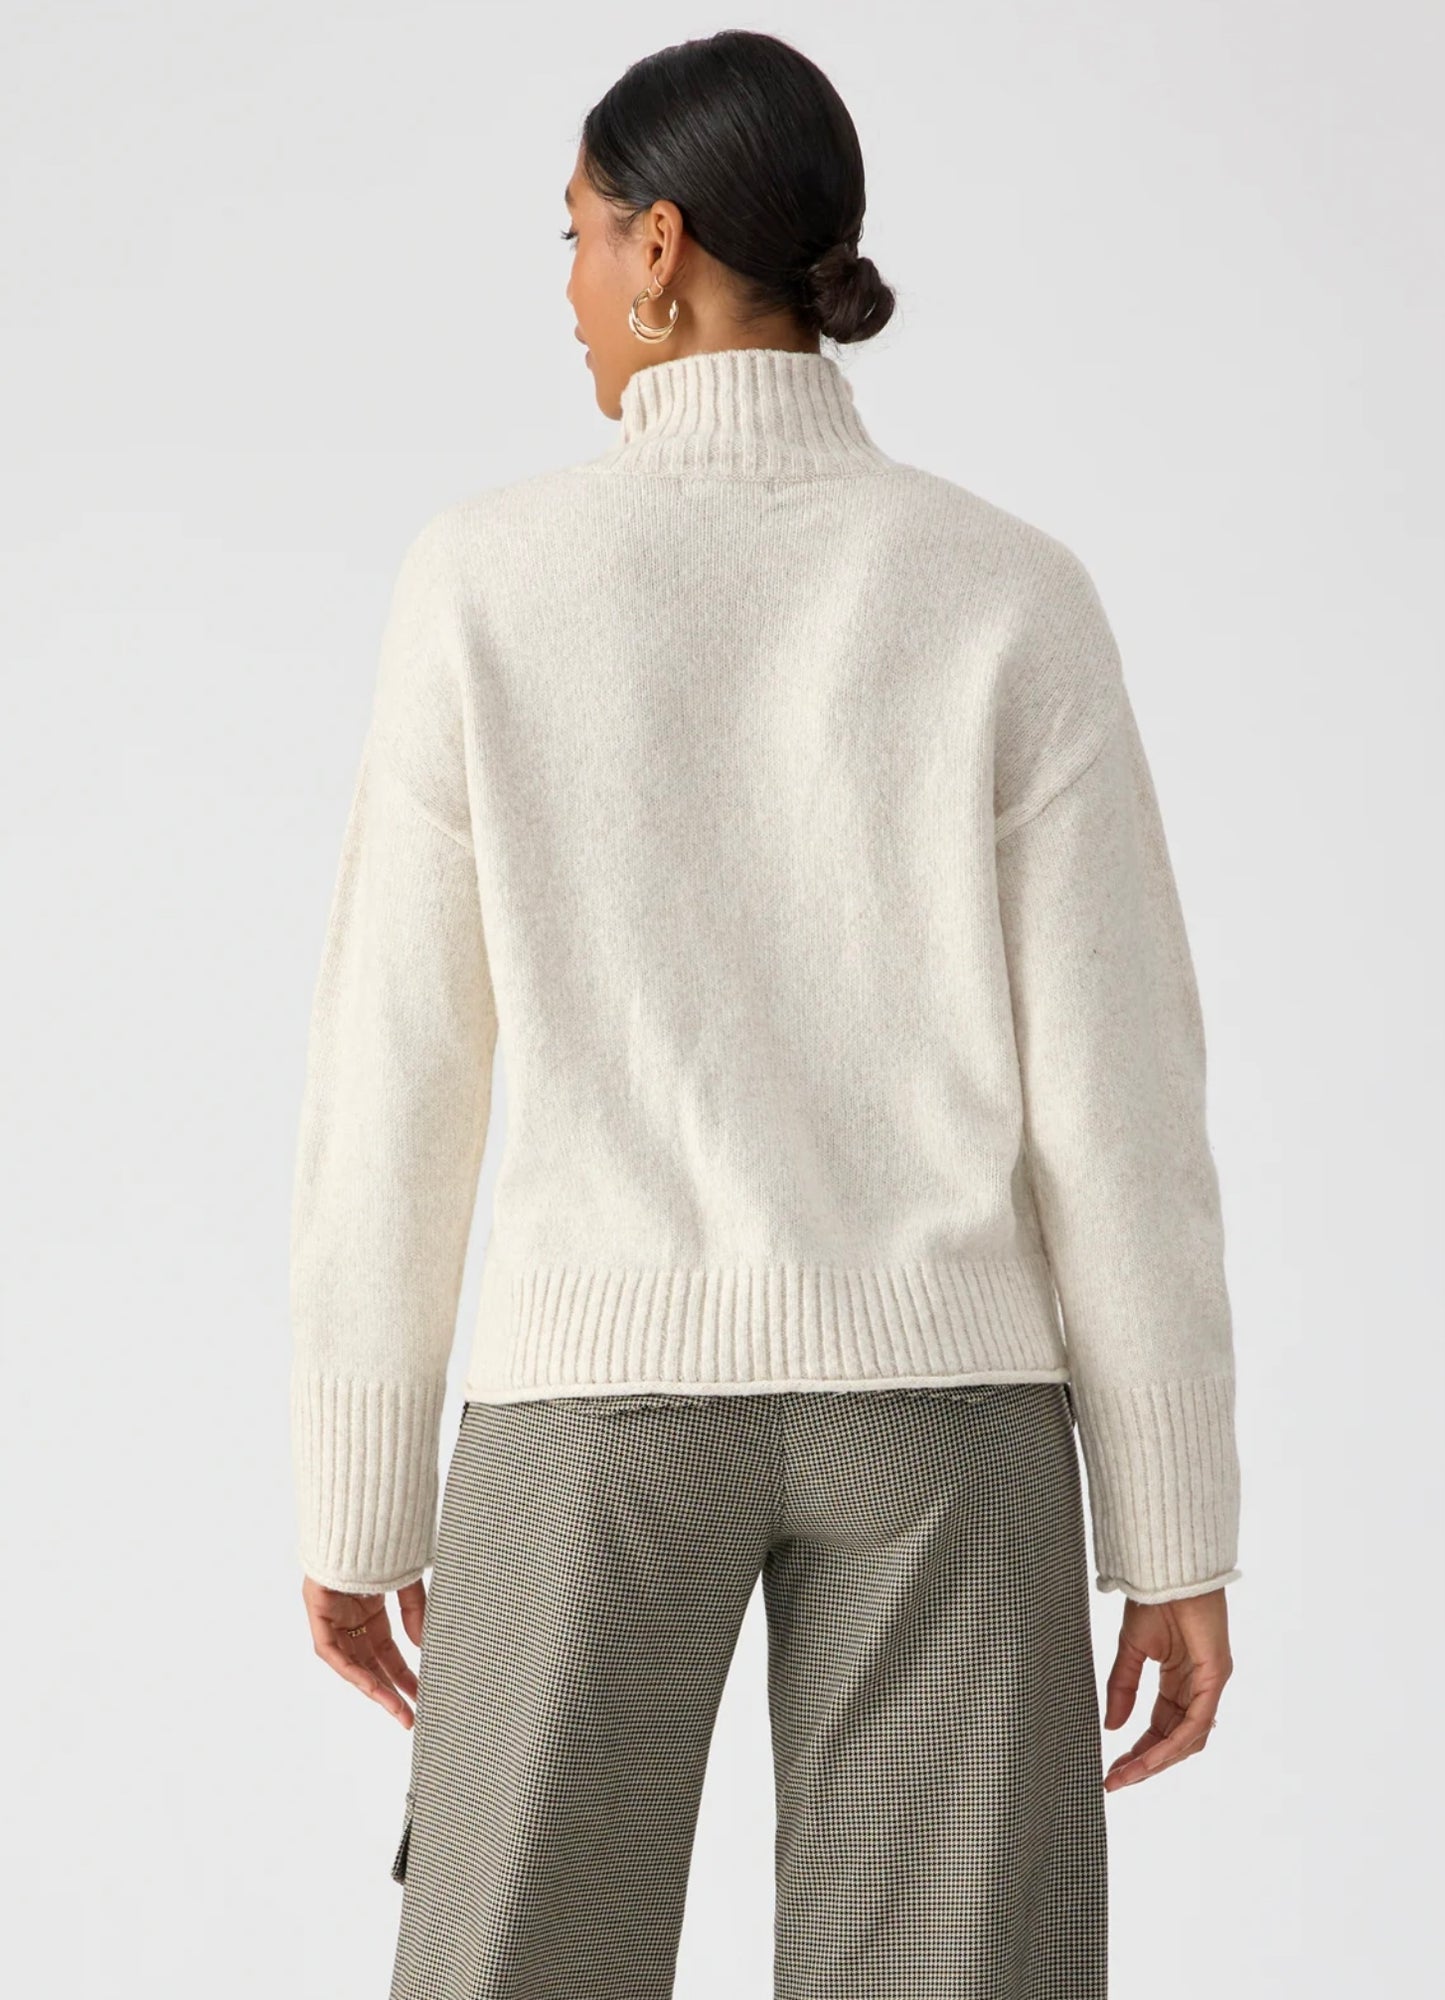 Cabin Fever Sweater — Toasted Marshmallow